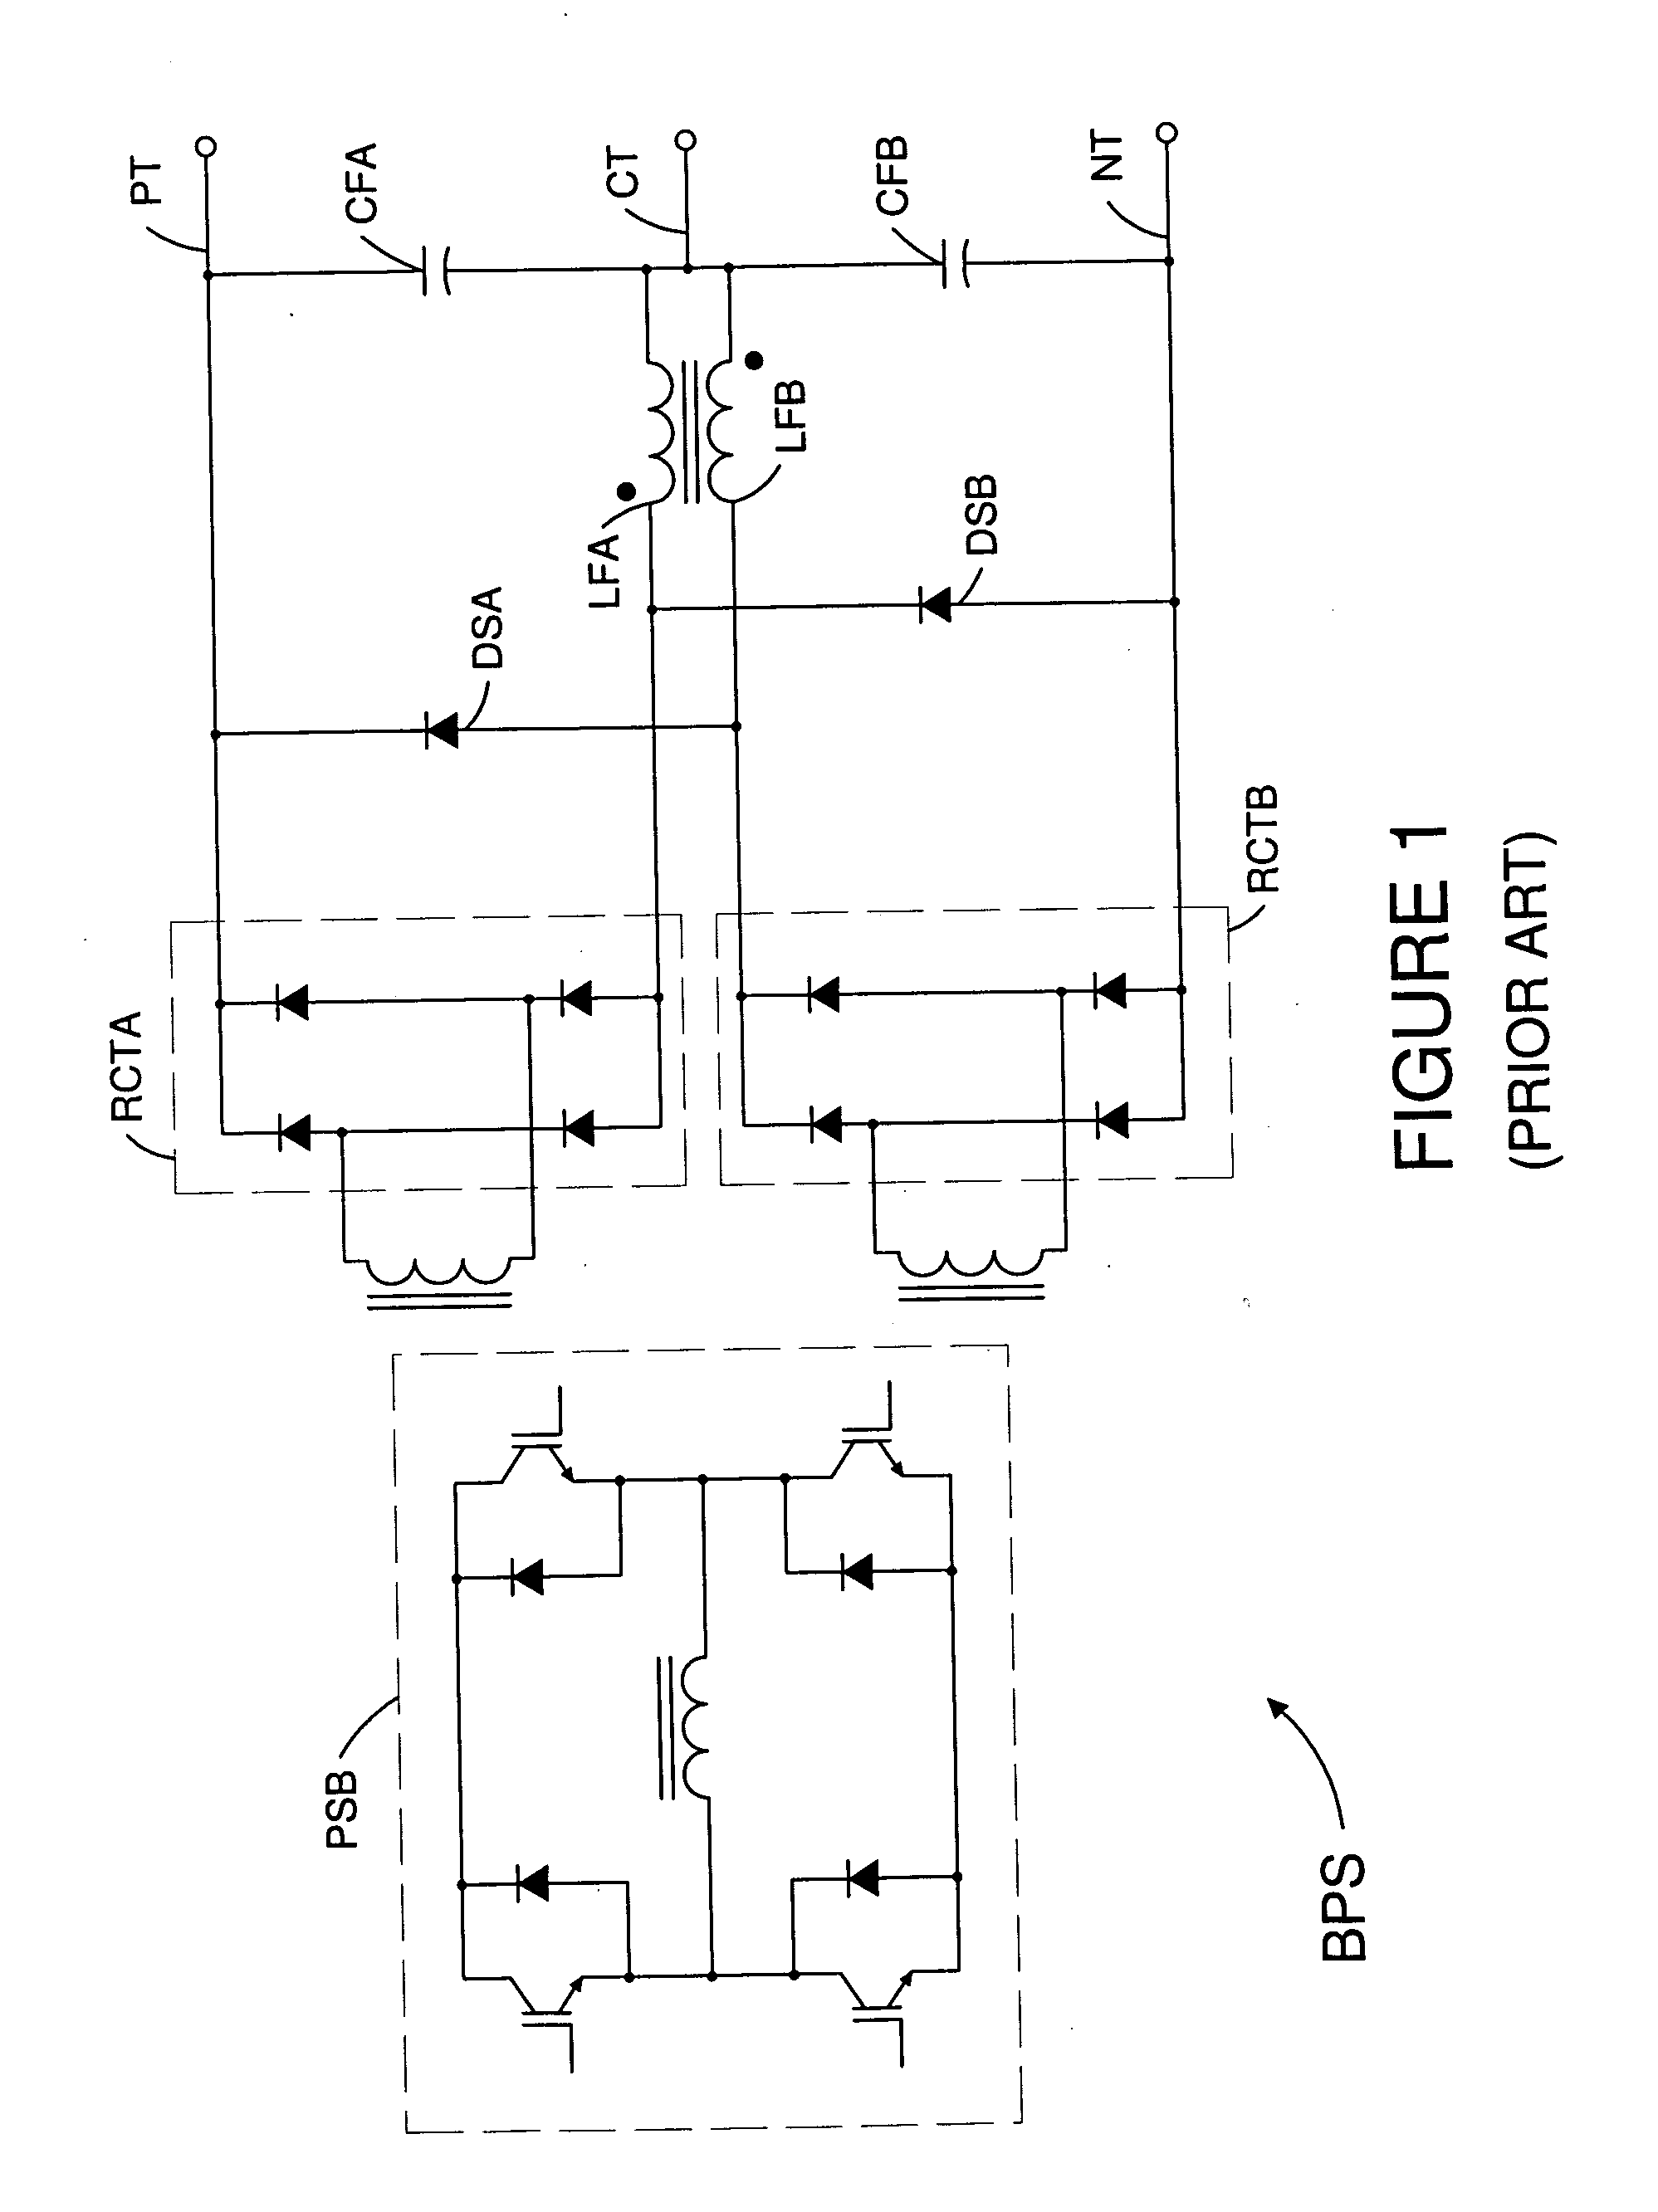 Bipolar power supply with lossless snubber